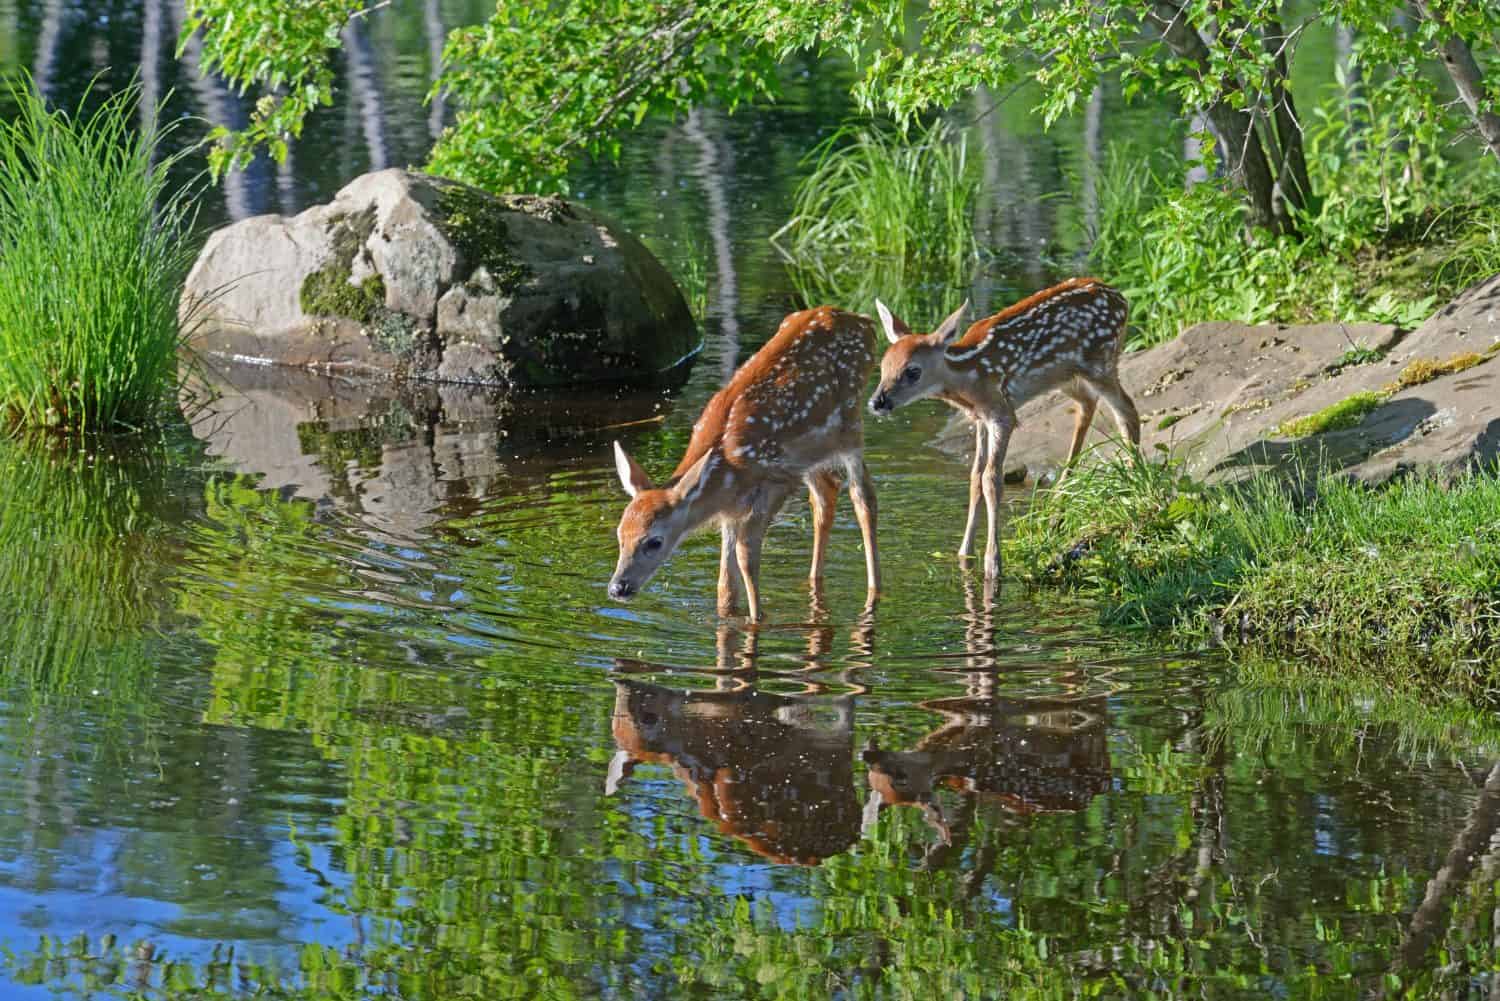 Little White Tailed Deer Fawns drink from a clear lake.